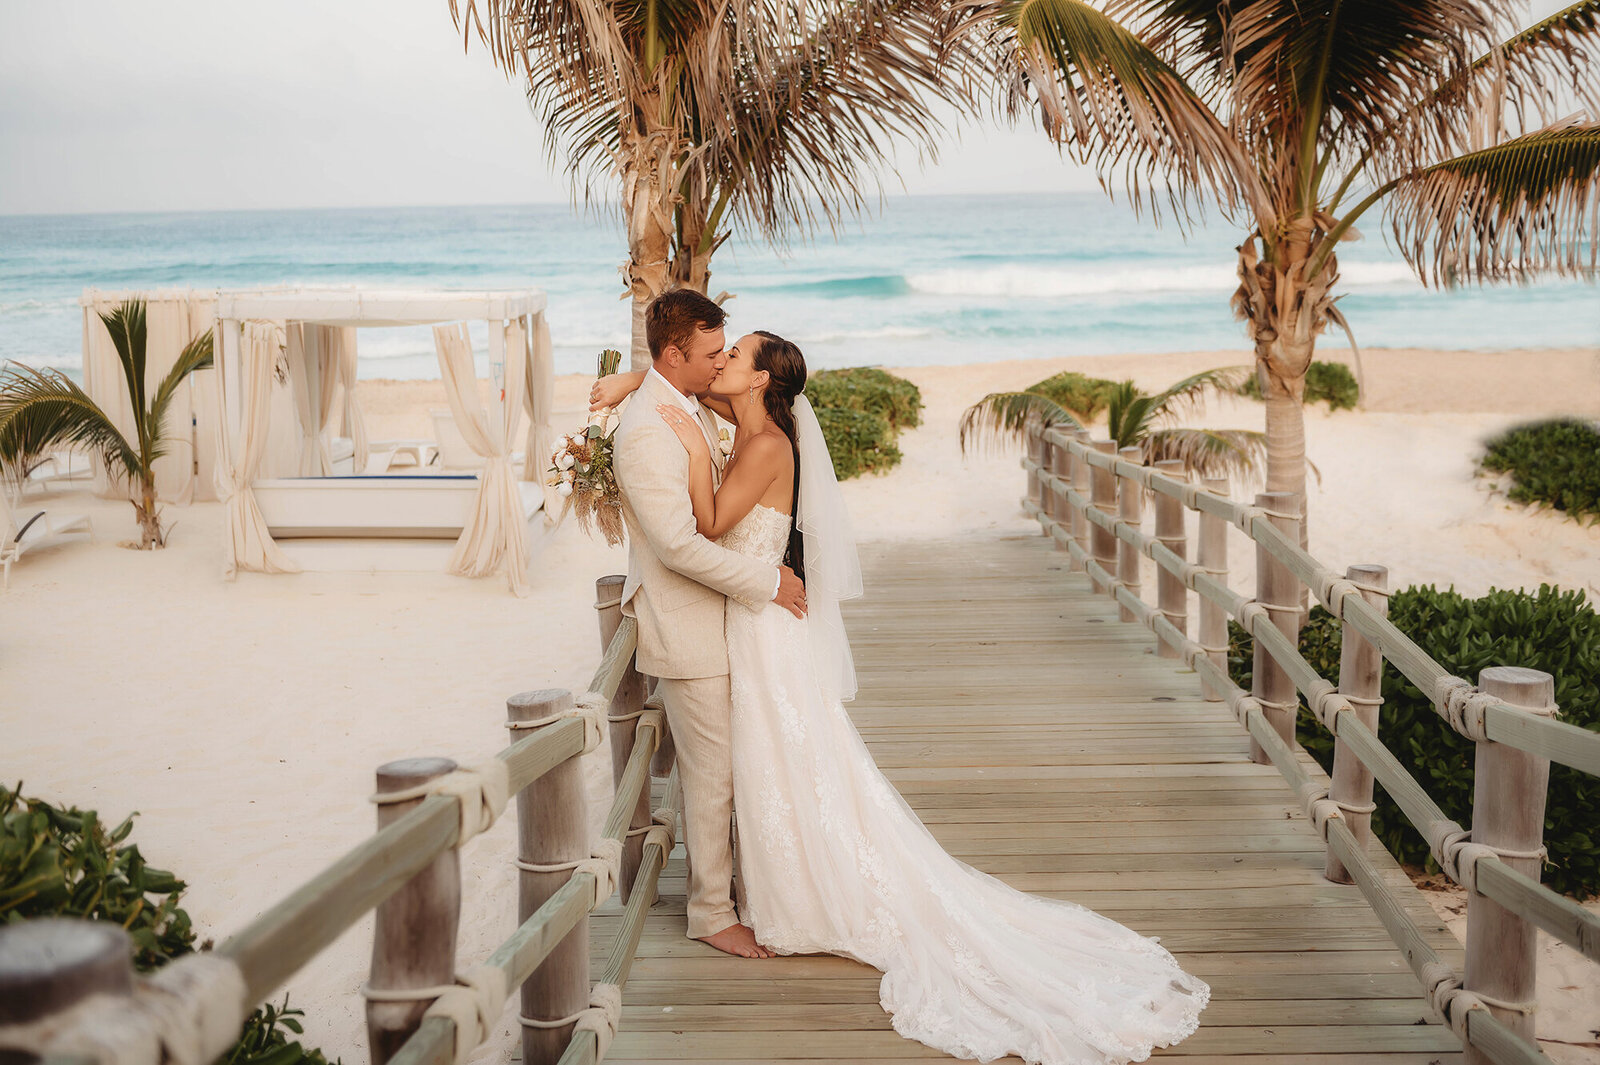 Newlyweds kiss after their Elopement Ceremony at Live Aqua Resort in Cancun Mexico.